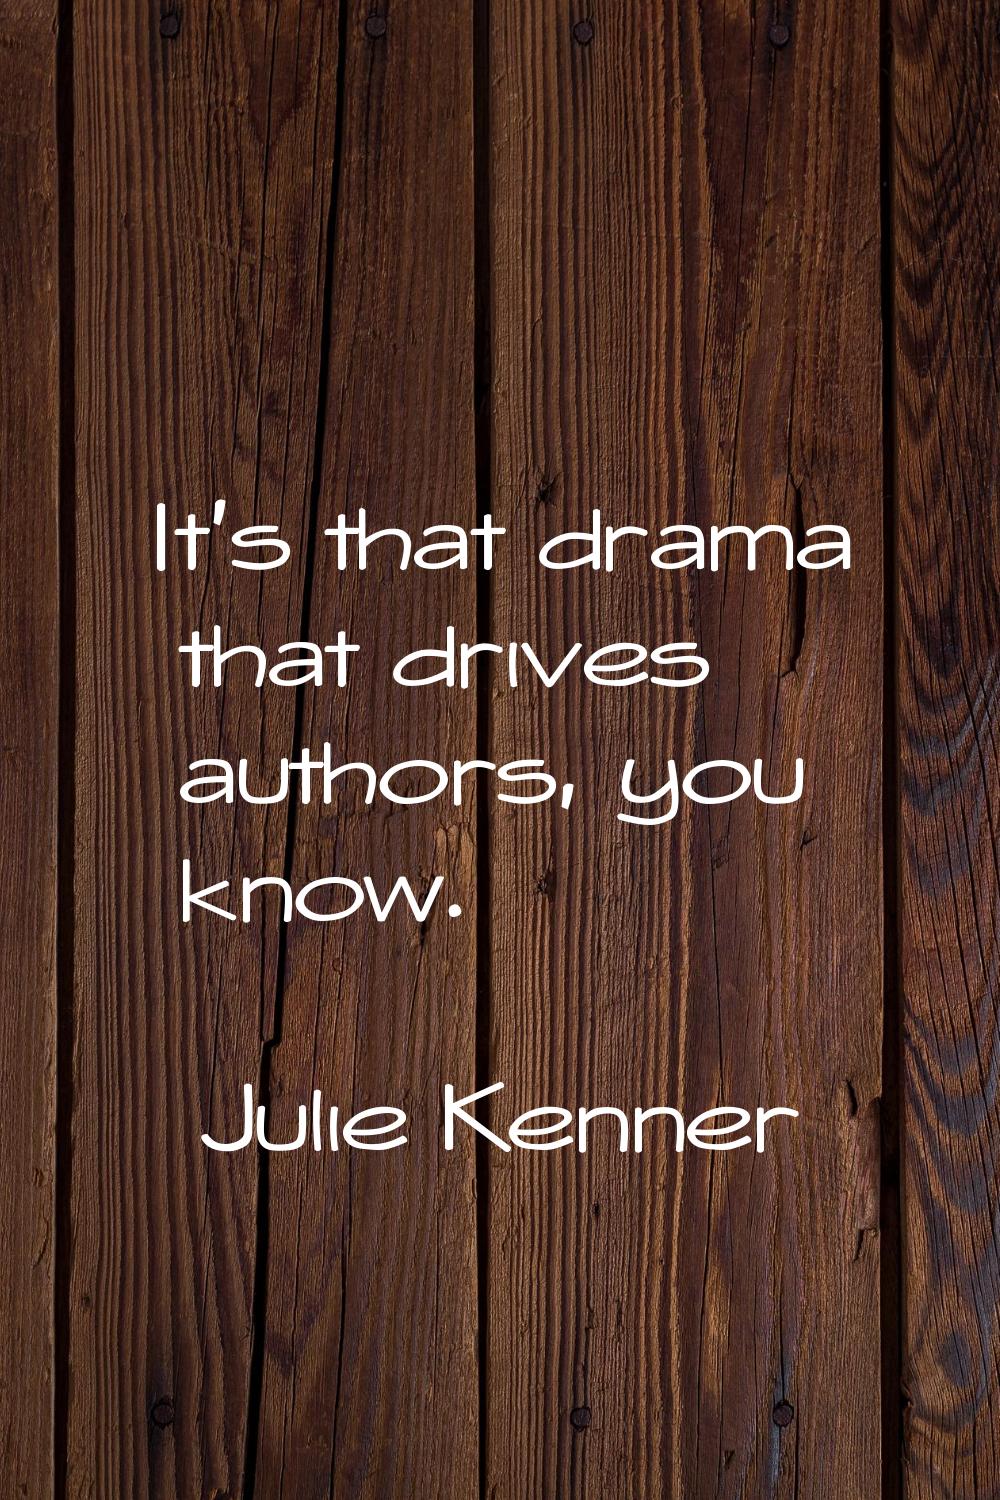 It's that drama that drives authors, you know.